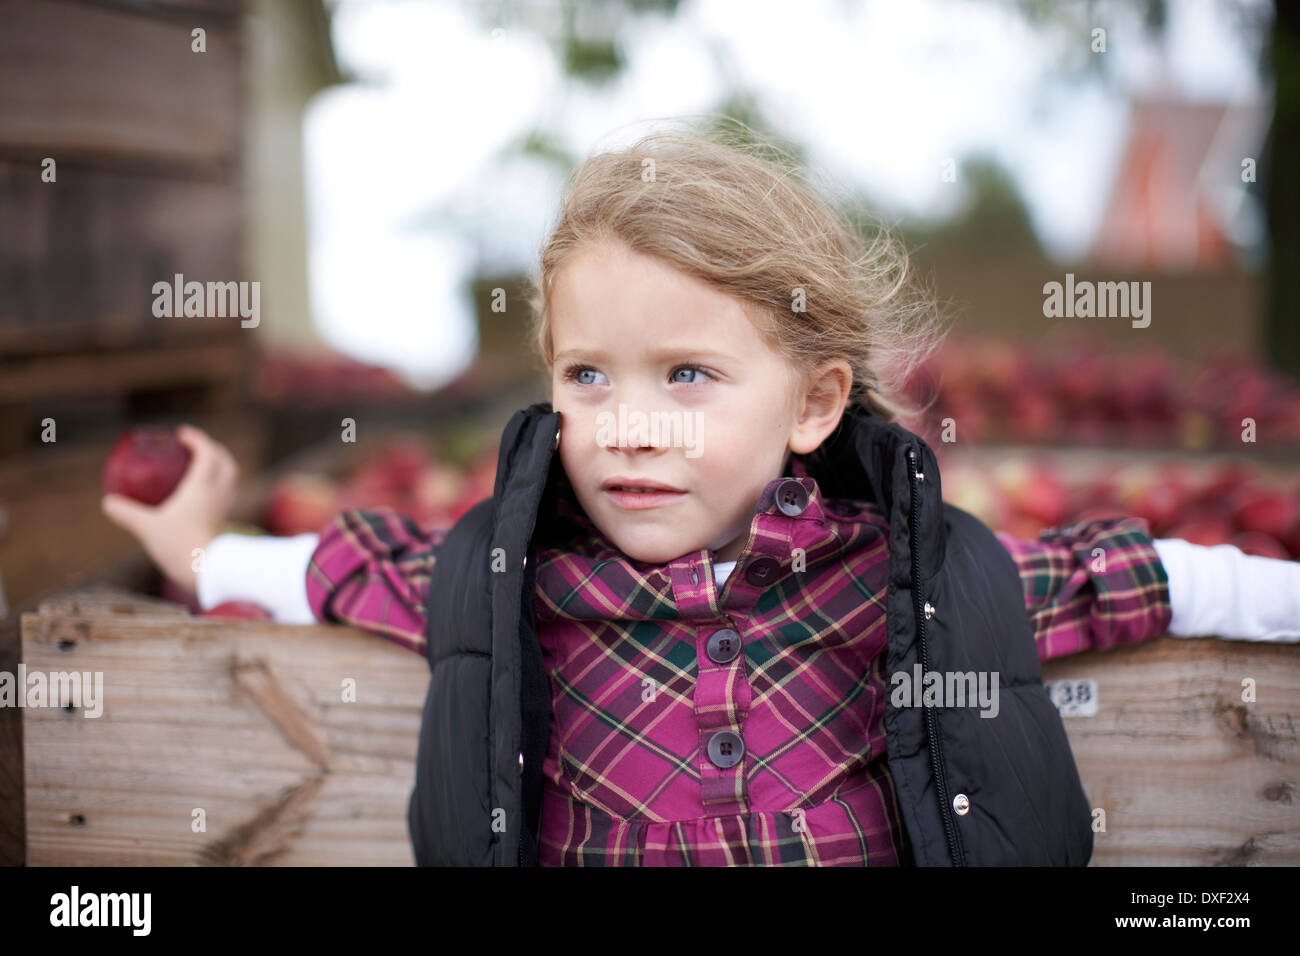 Girl Leaning on Apple Crate, Milton, Ontario, Canada Stock Photo